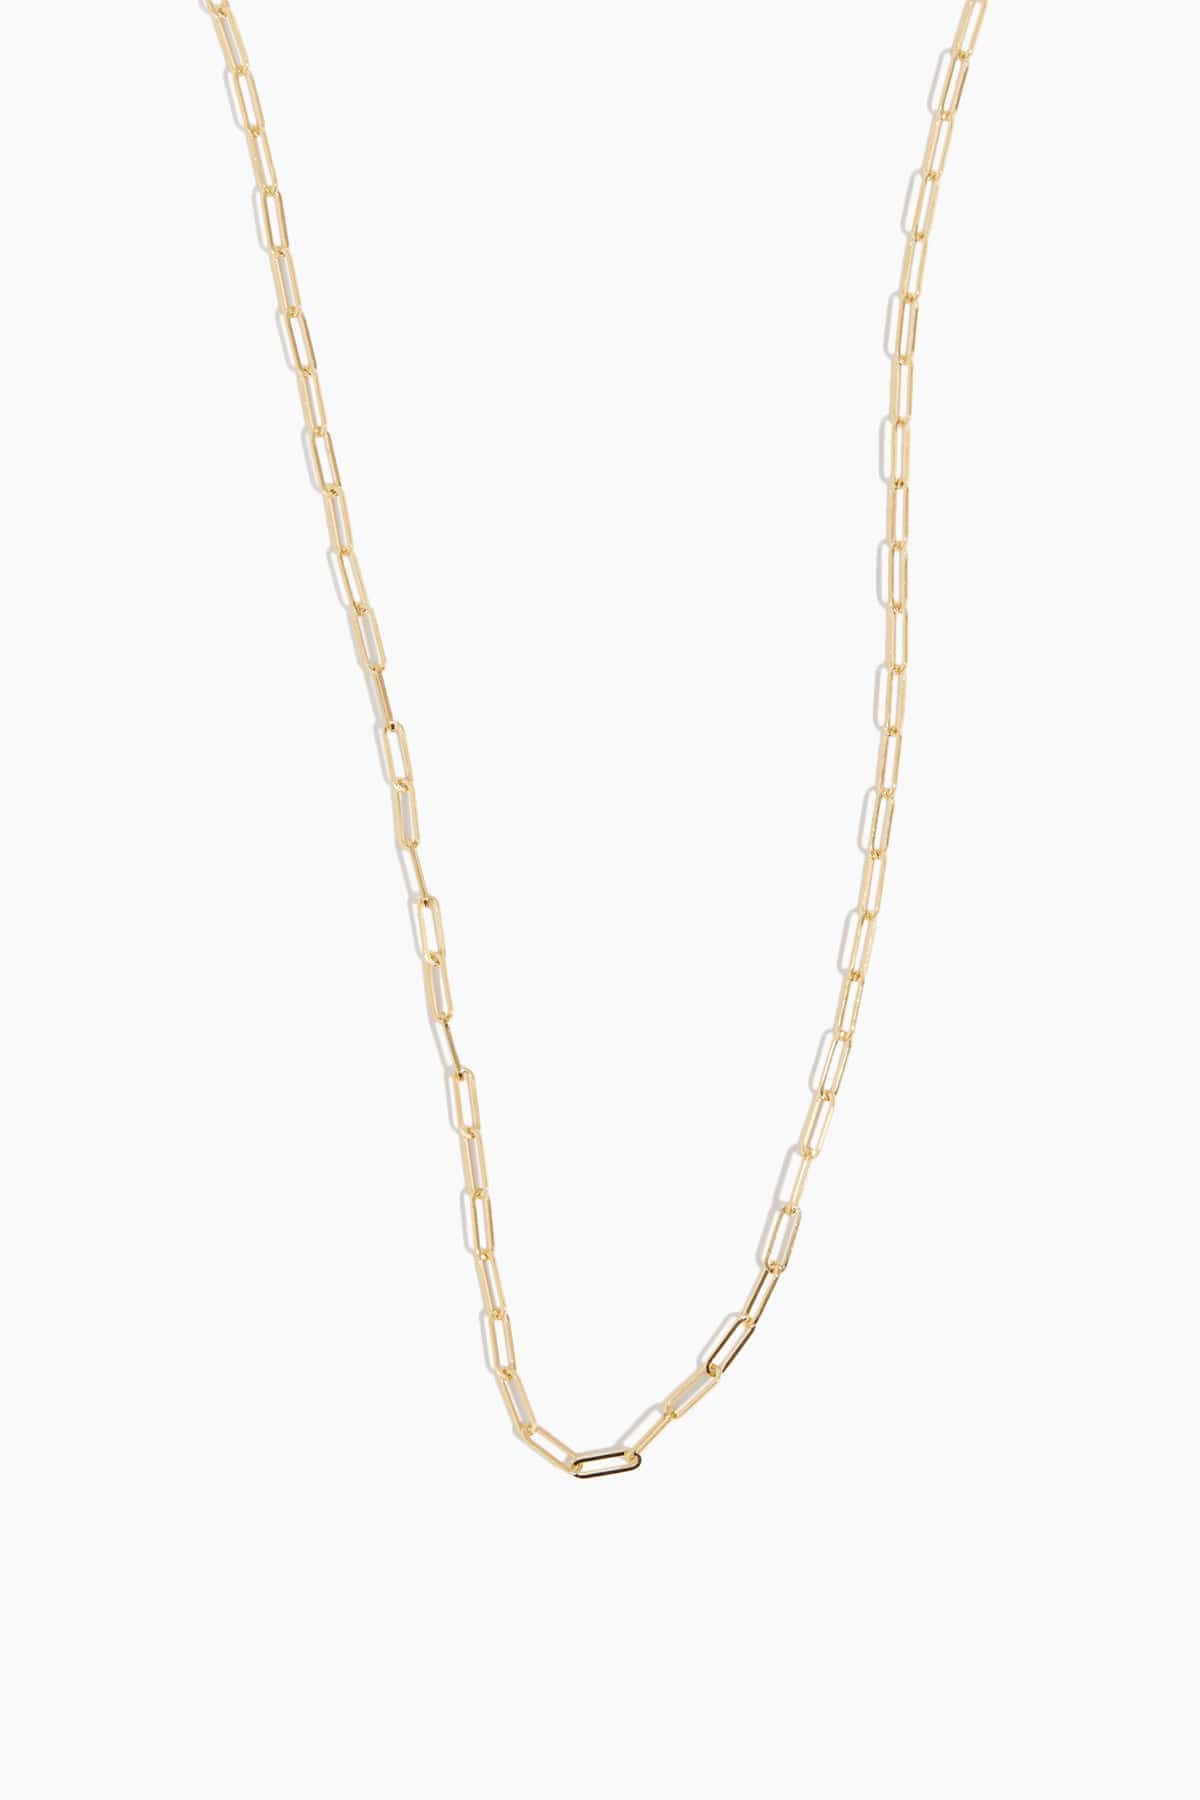 Vintage La Rose 16 Small Link Paperclip Chain Necklace in 14k Yellow Gold" - Gold - Size: One size